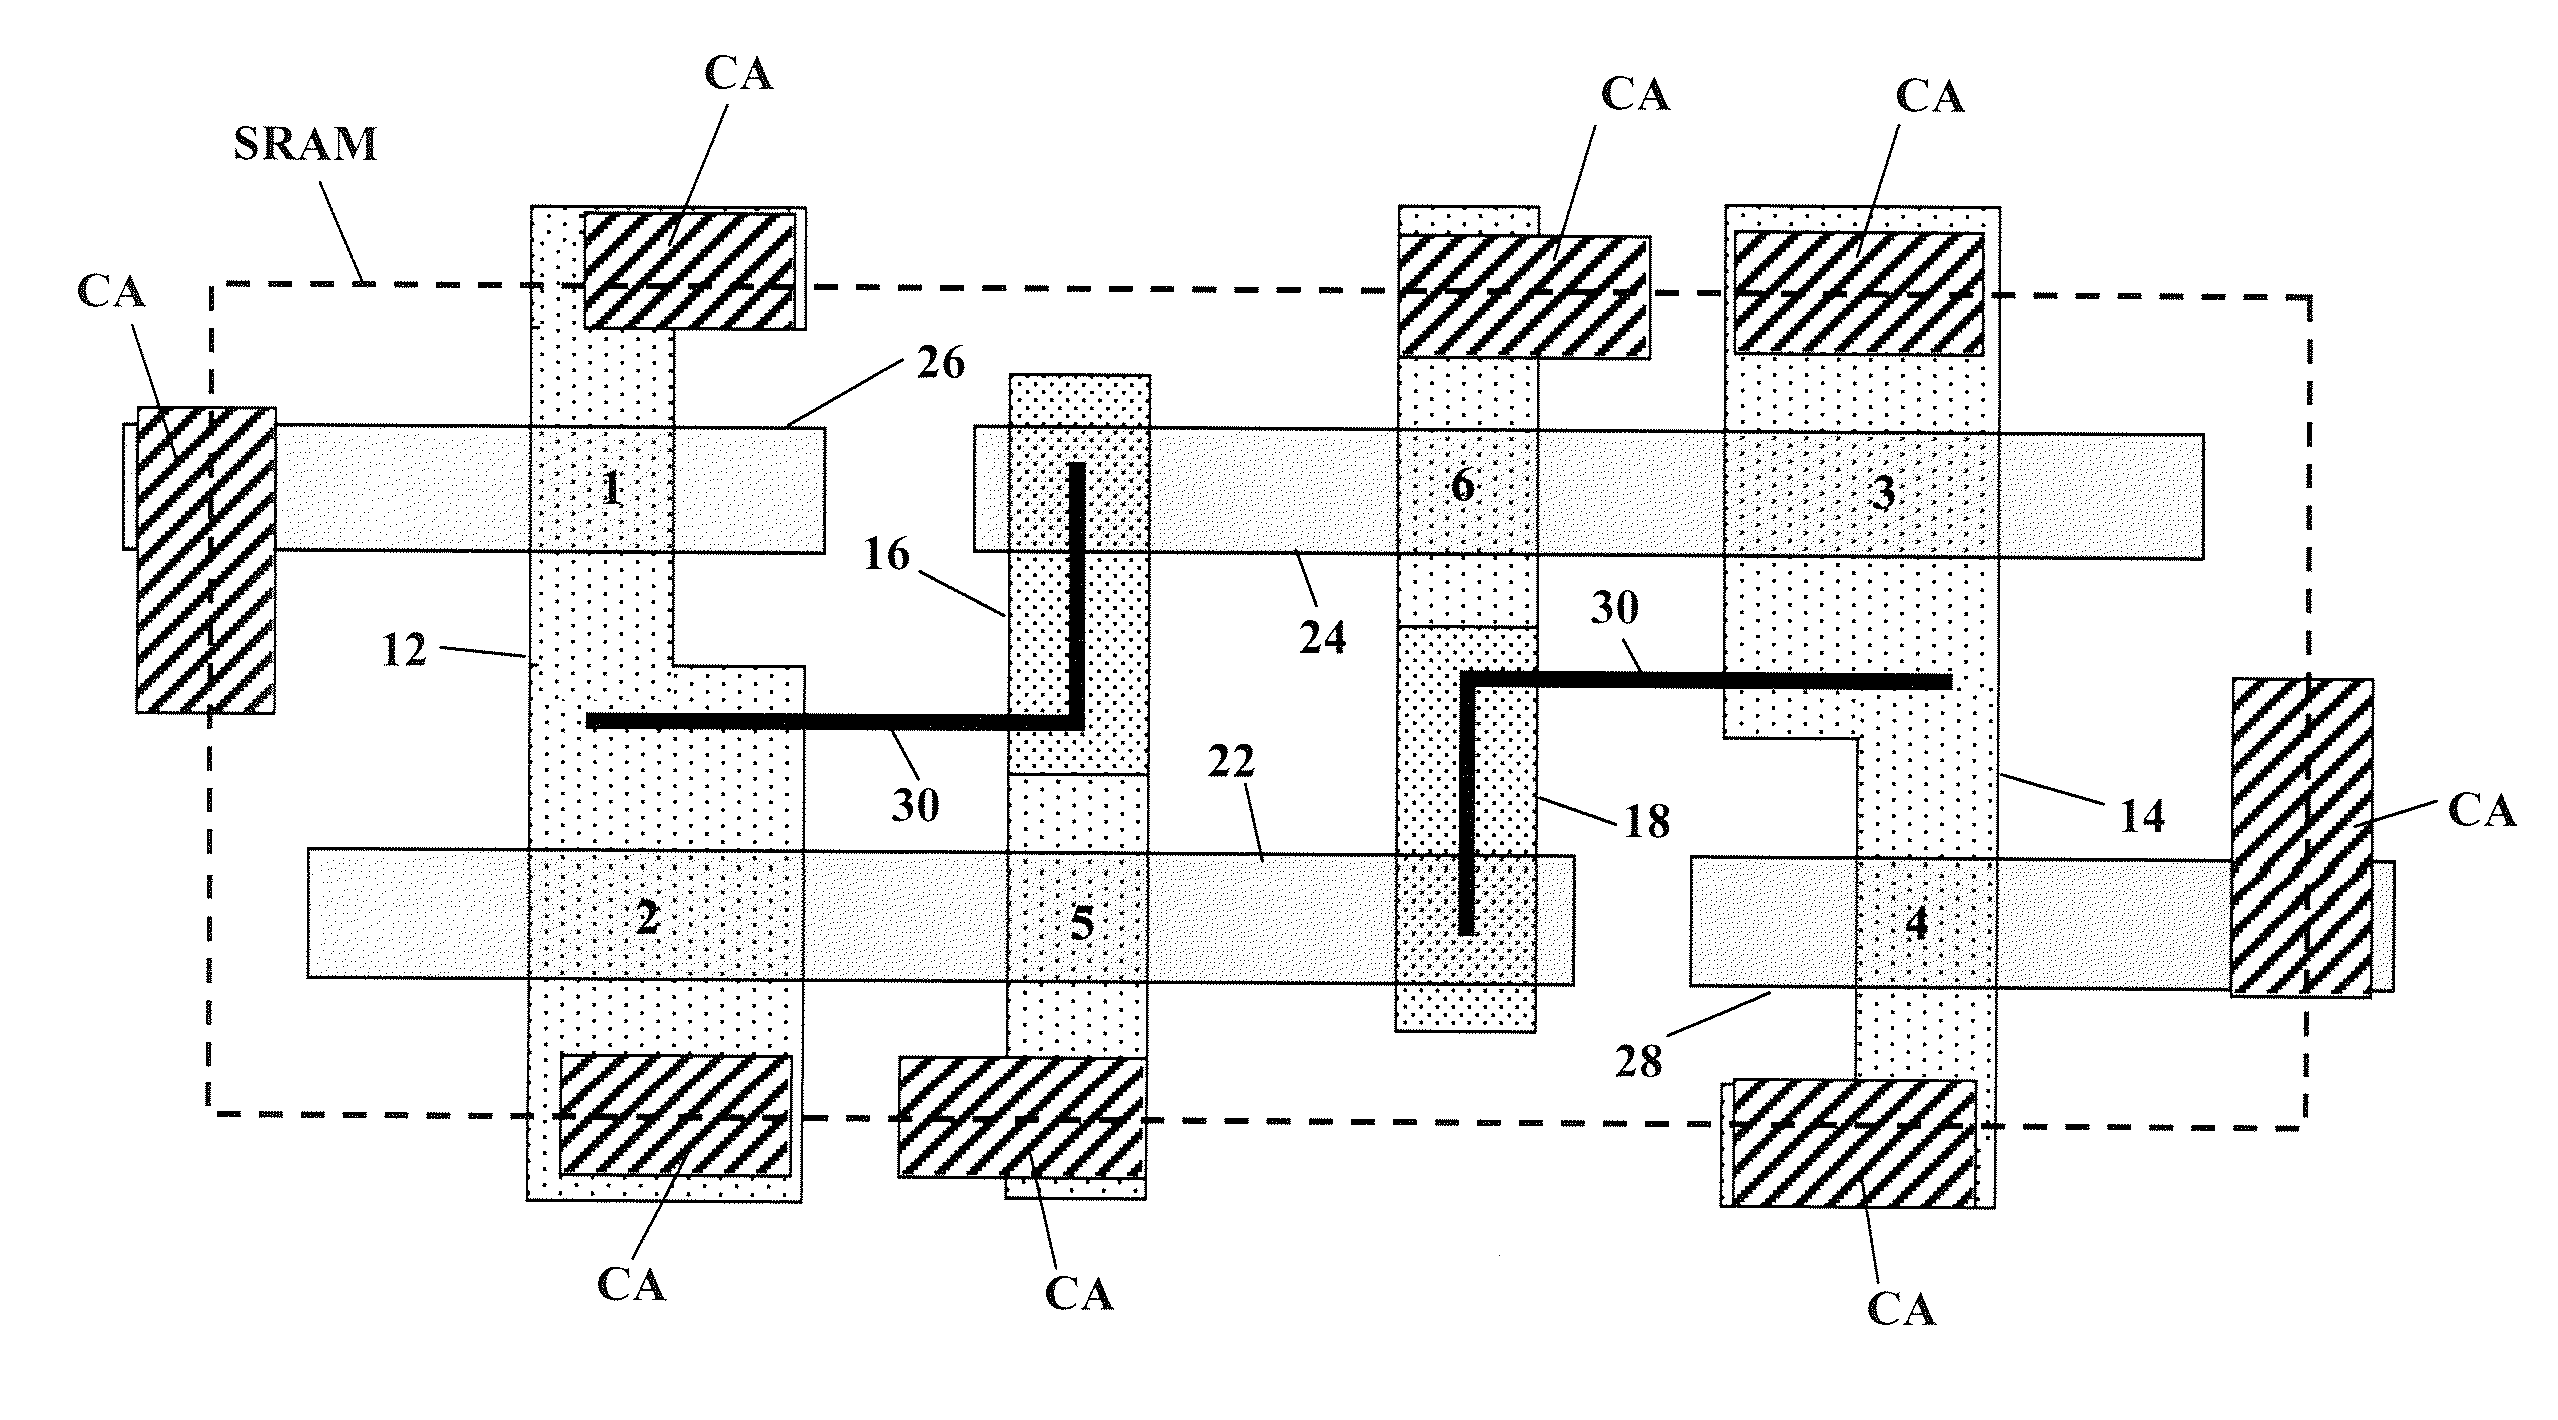 Sub-lithographic local interconnects, and methods for forming same